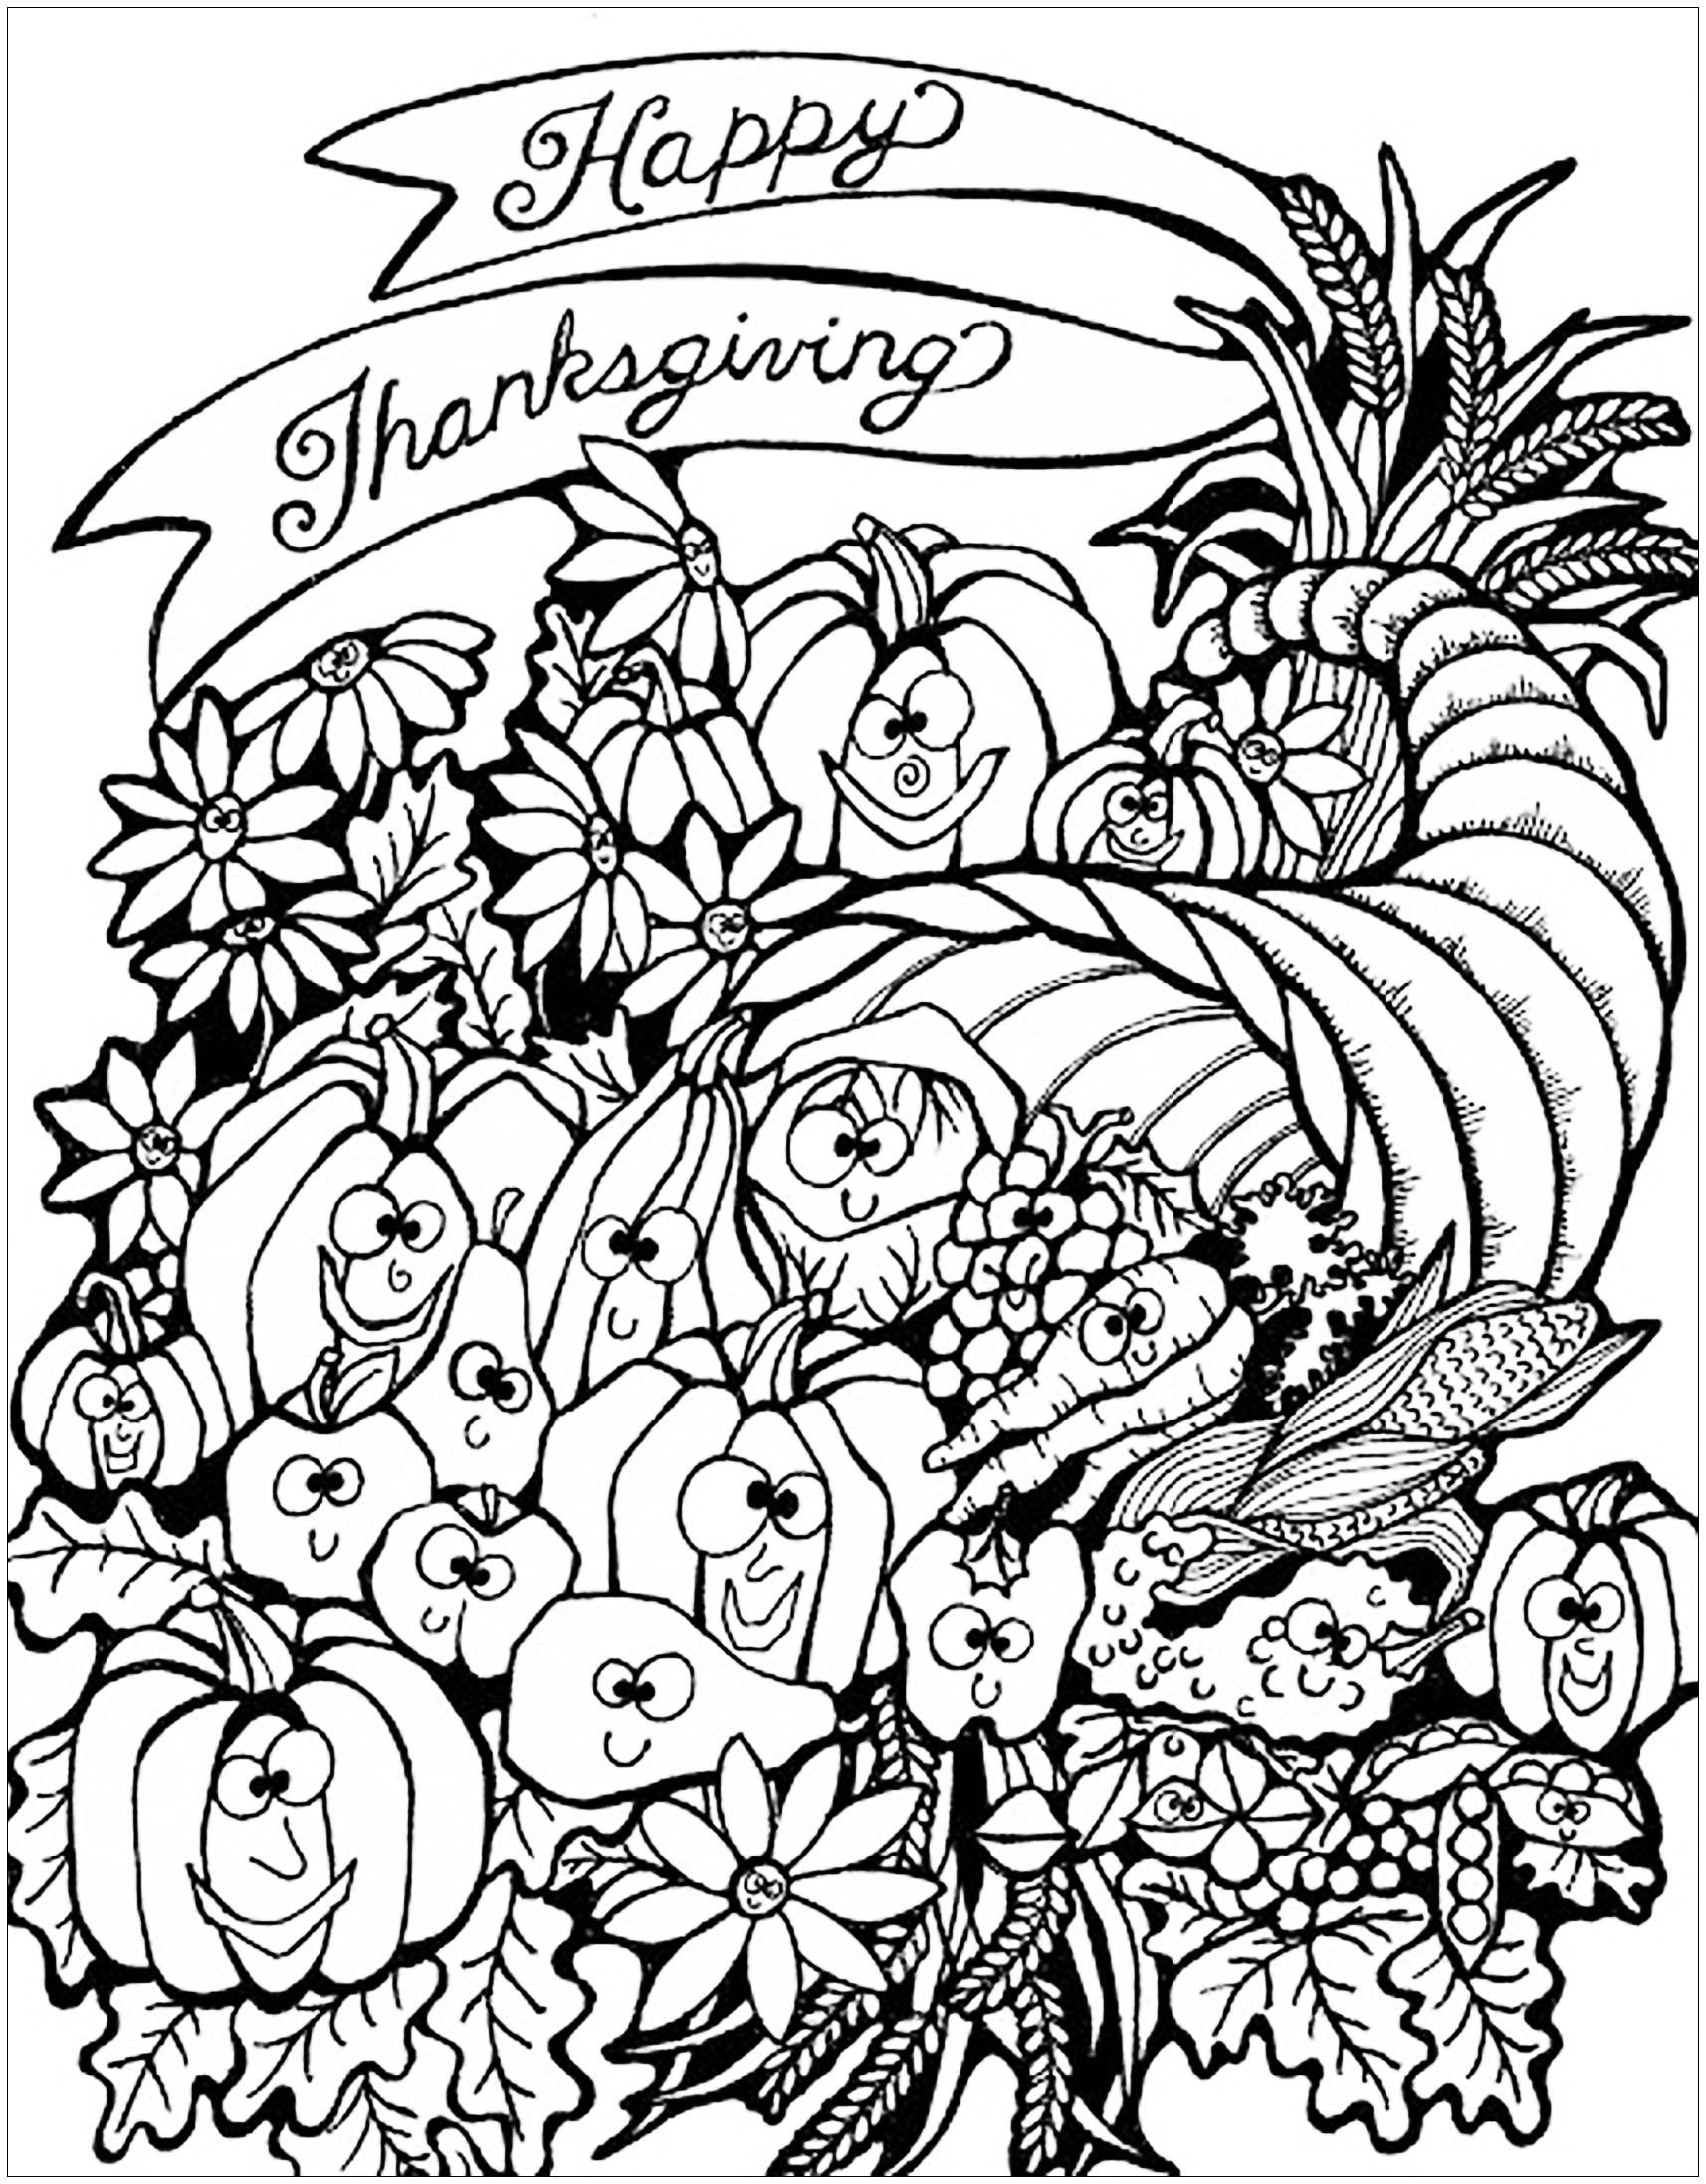 Get Thanksgiving Coloring Pages For Kids